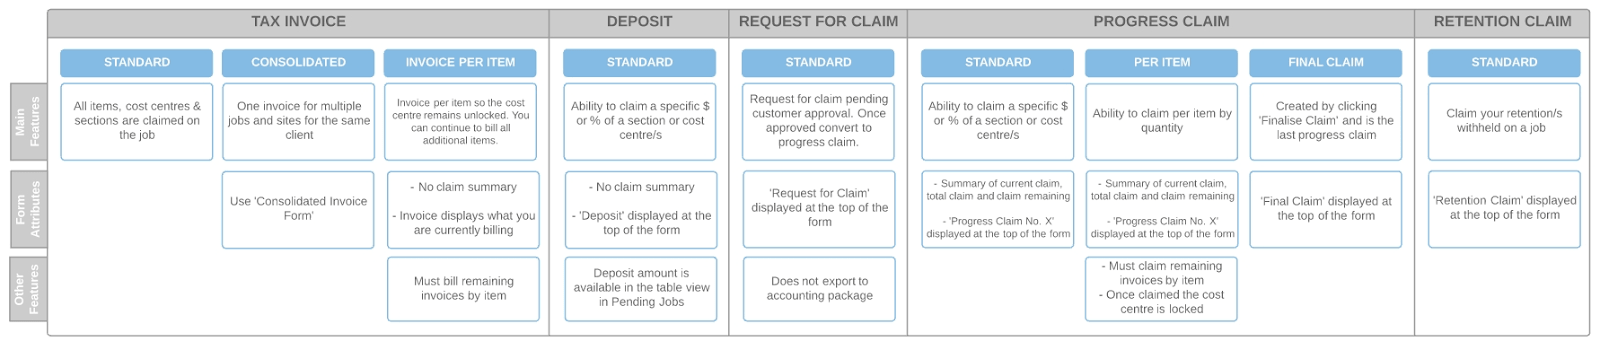 A table showing the different types of tax invoices, deposits, claim requests, progress claims and retention claims available in simPRO.